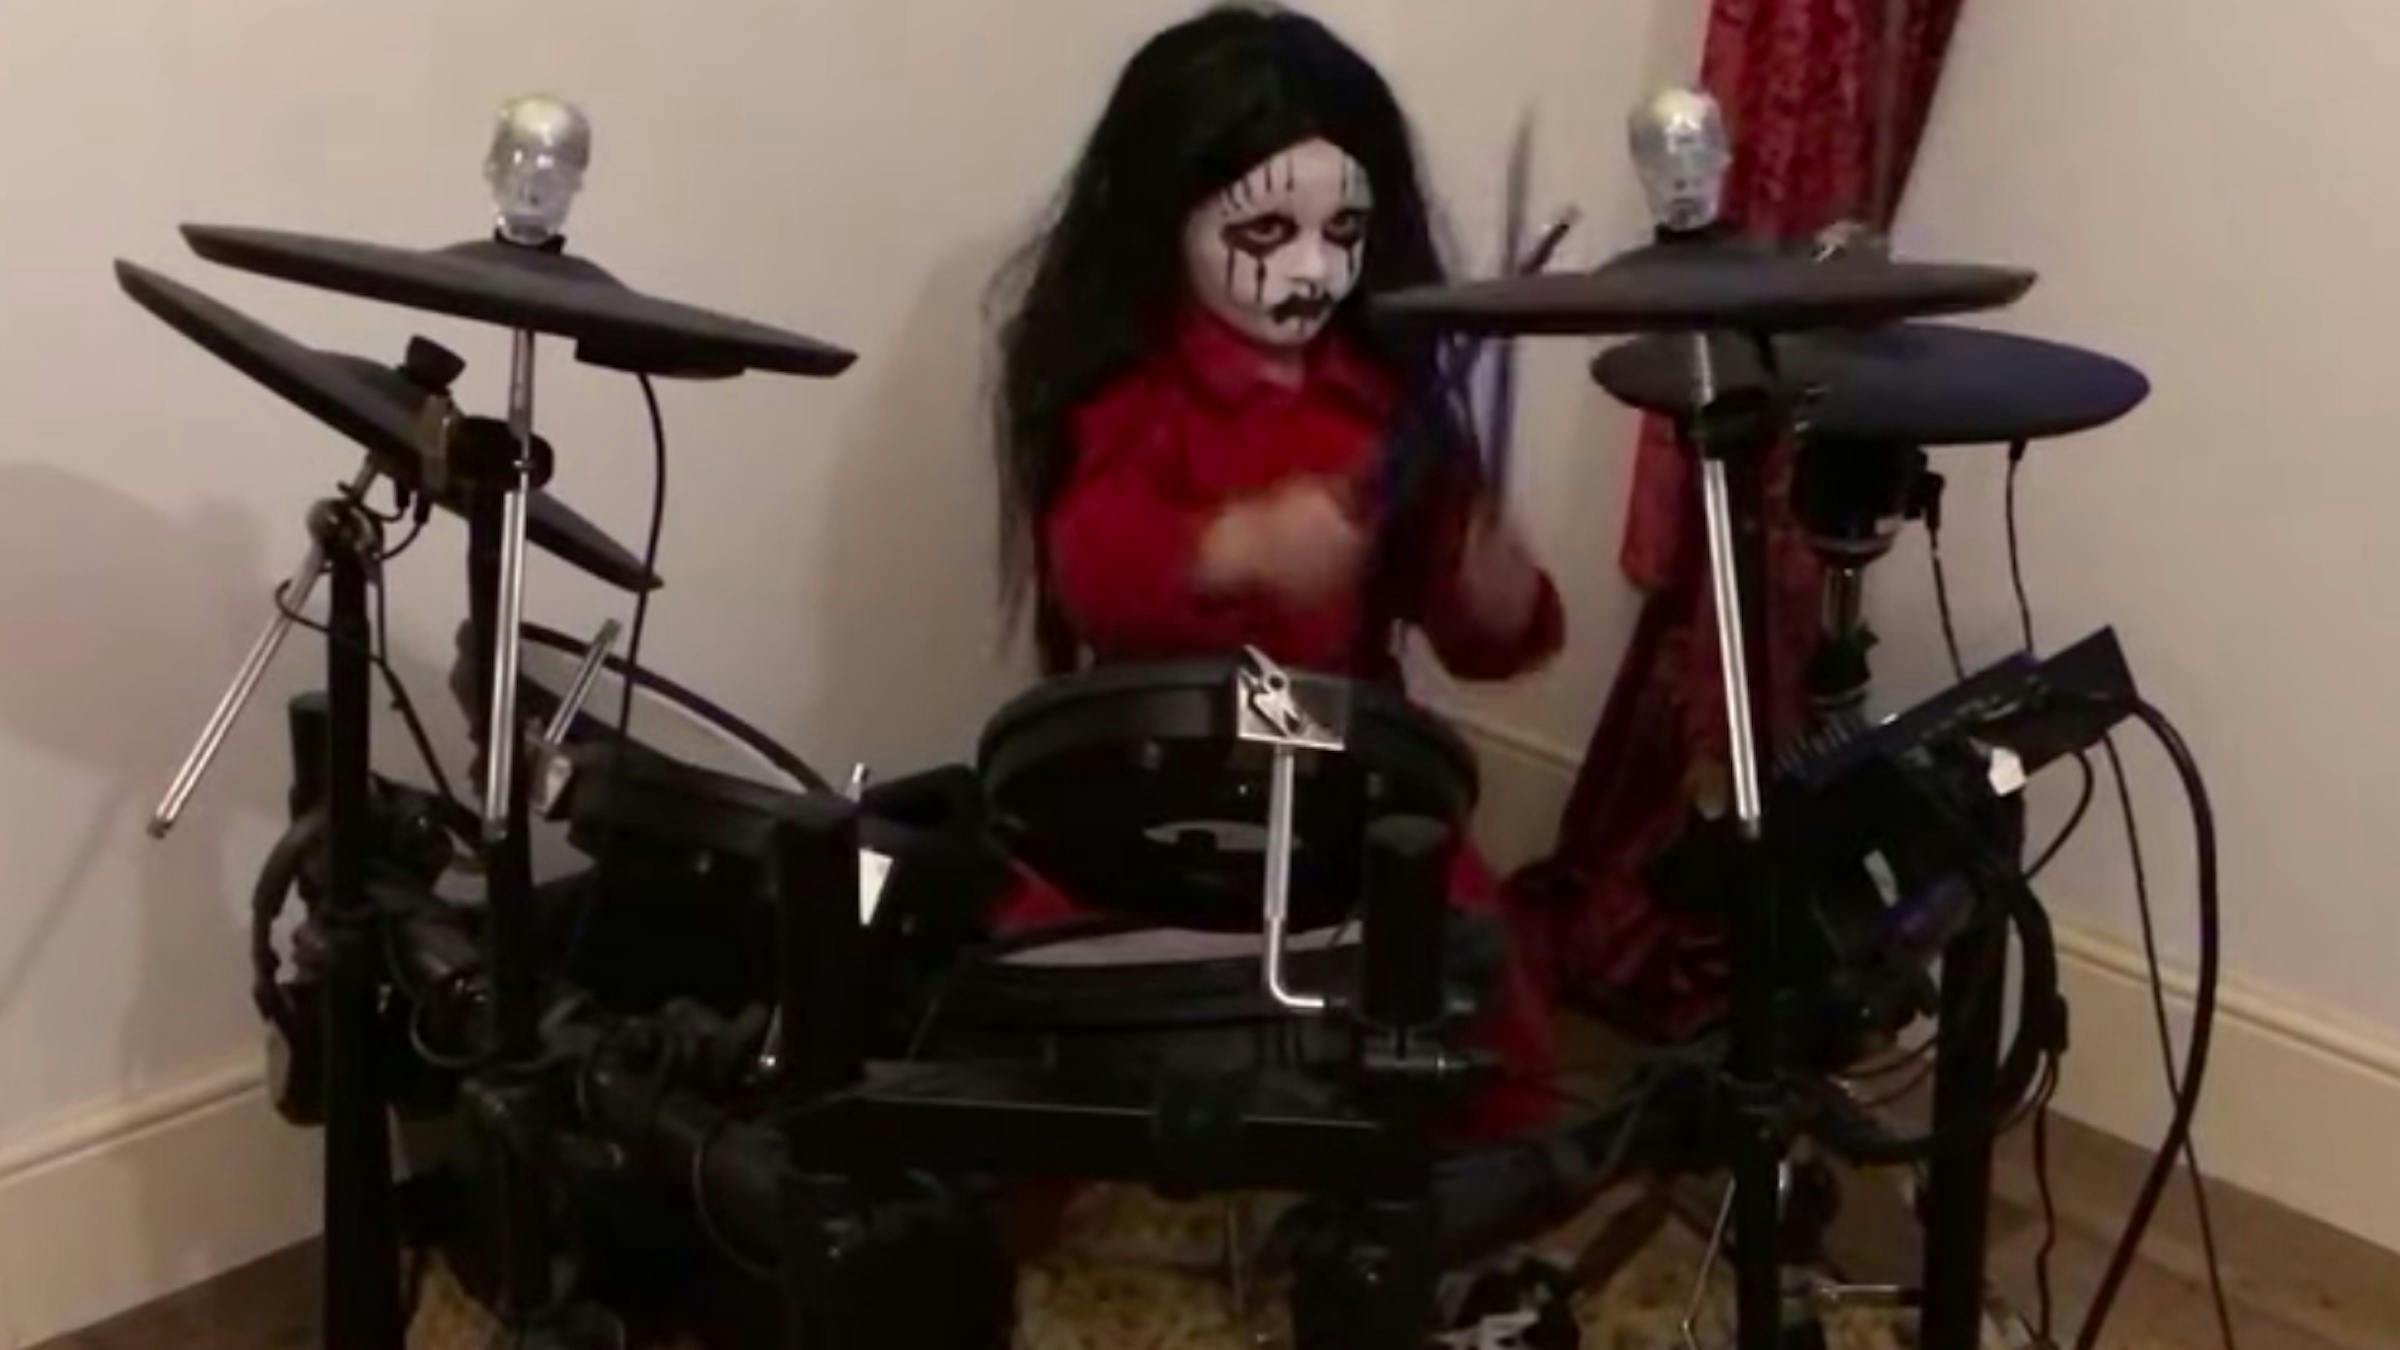 Here's That Viral 5-Year-Old Slipknot Drummer Performing Before I Forget Dressed As Joey Jordison